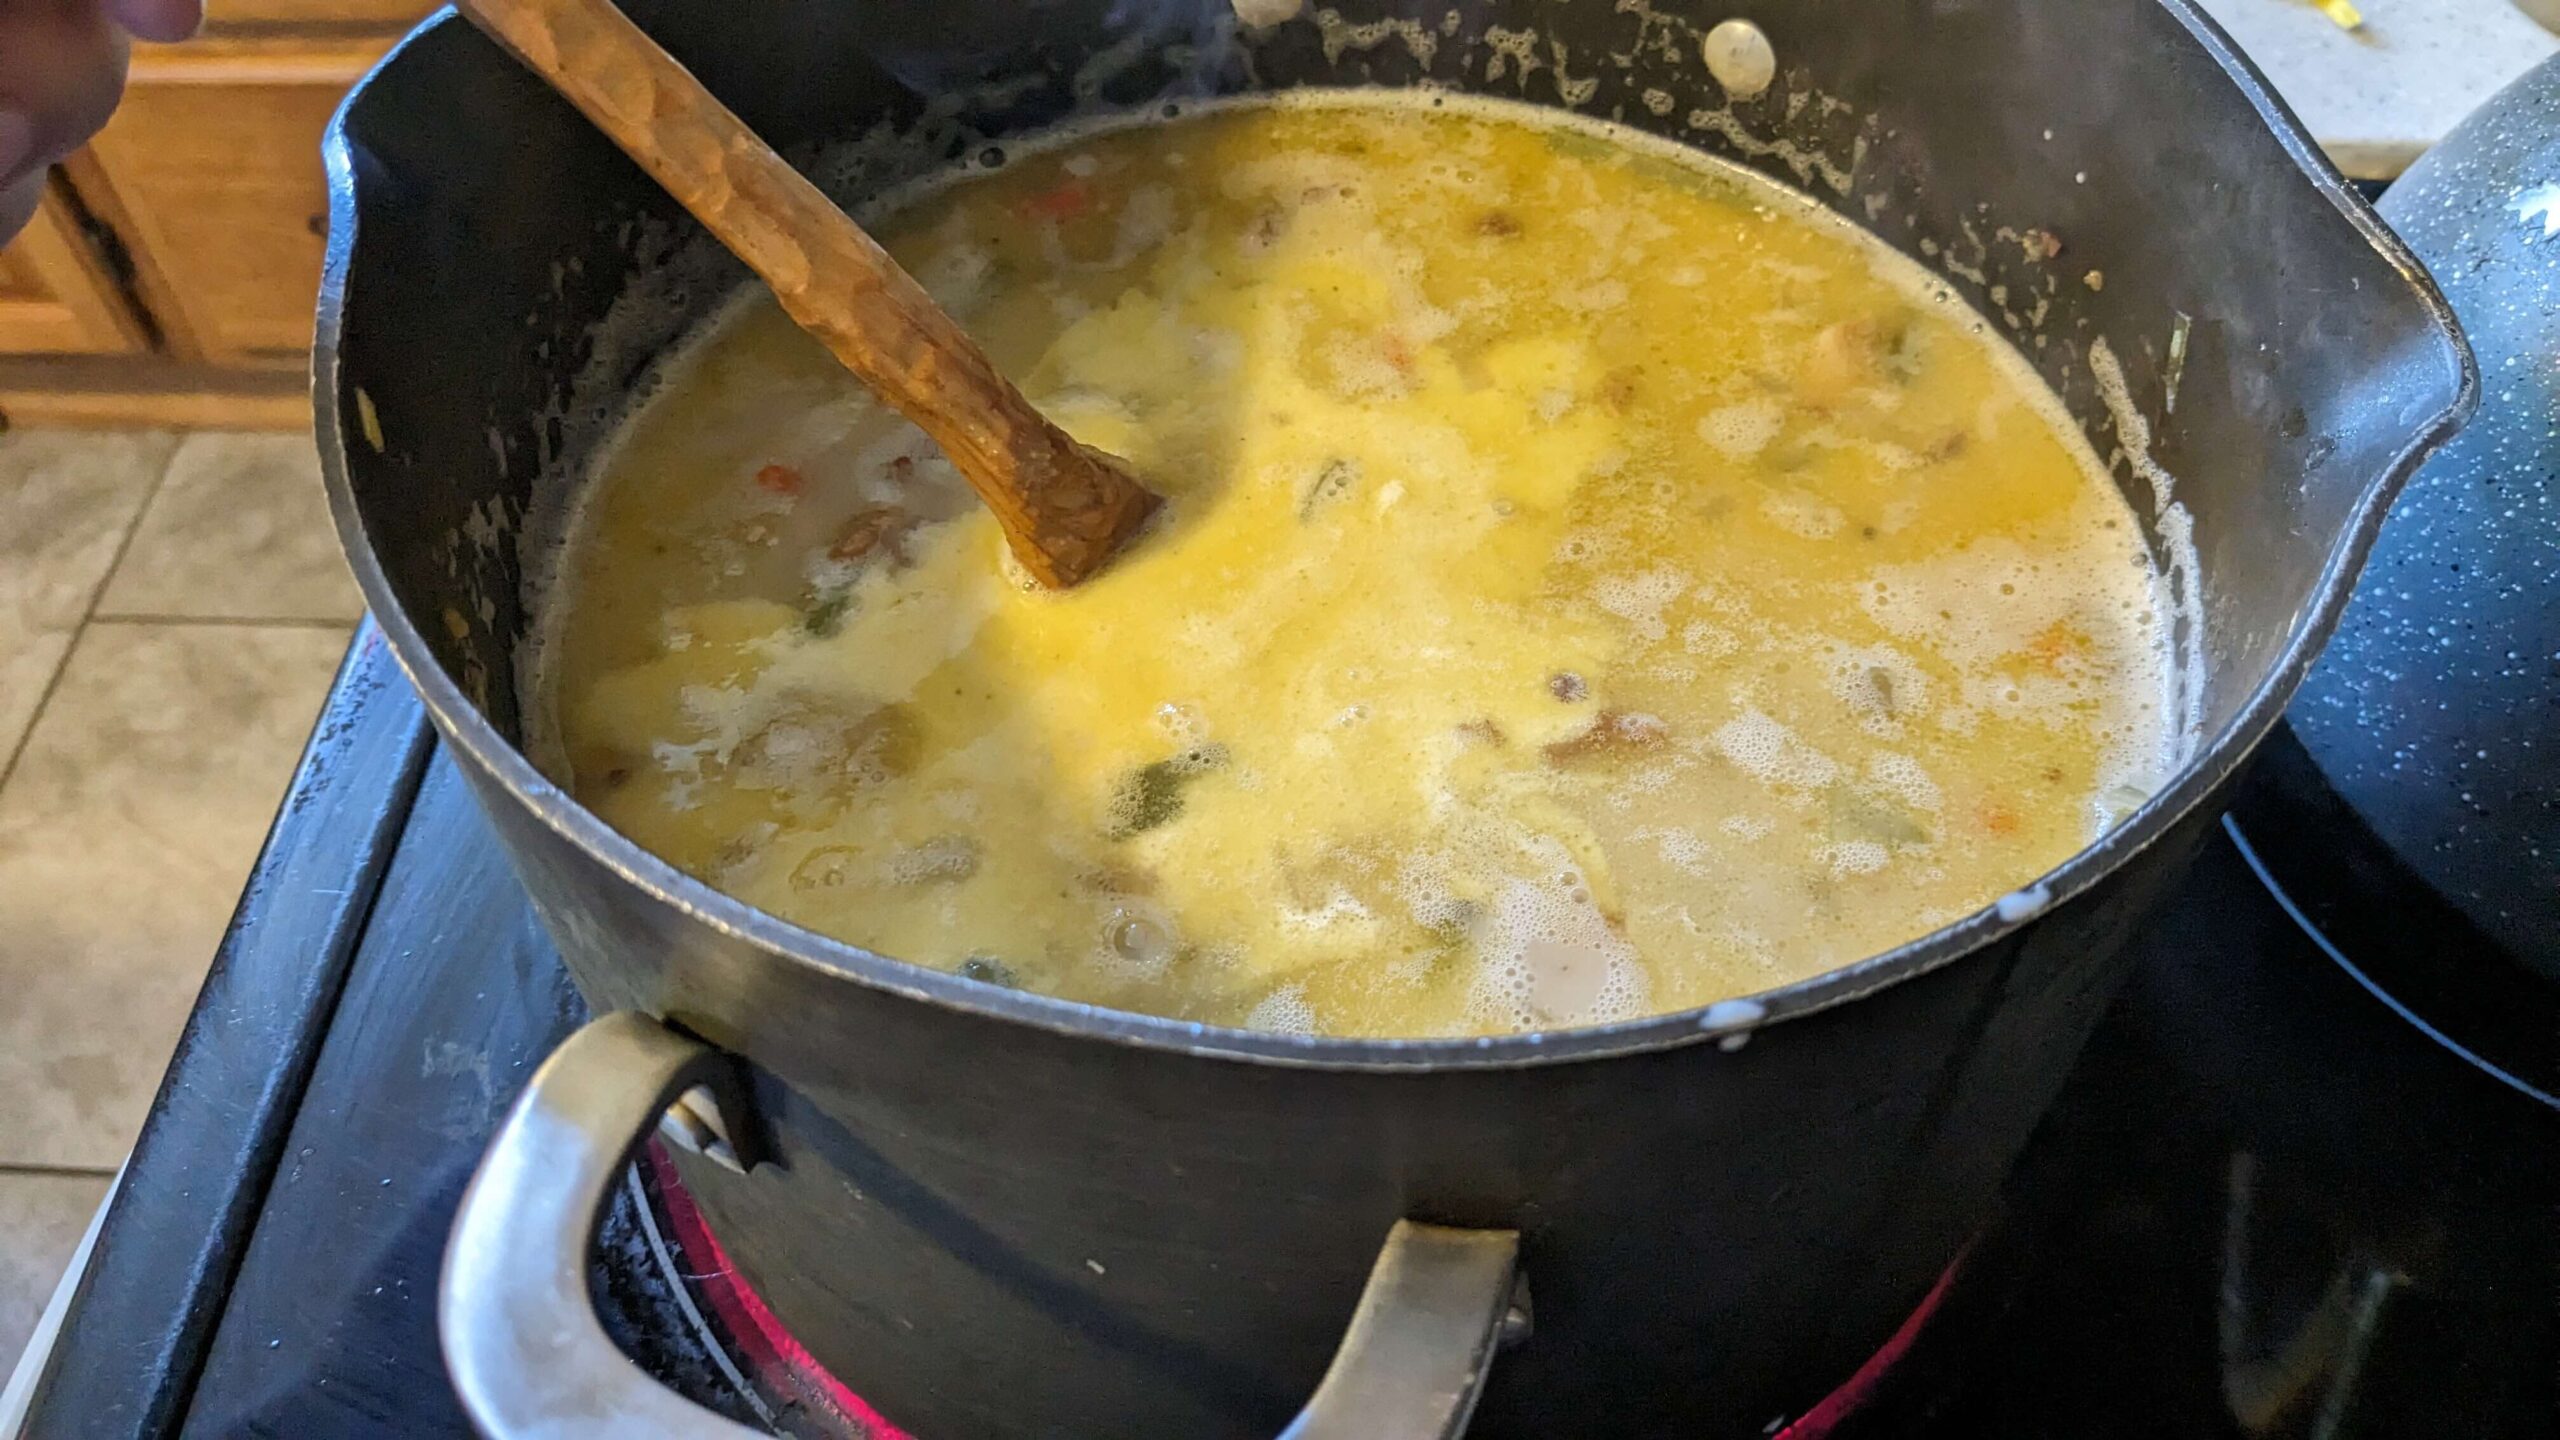 a pot on the stove with a wooden utensil in creamy liquid with diced vegetables near the surface